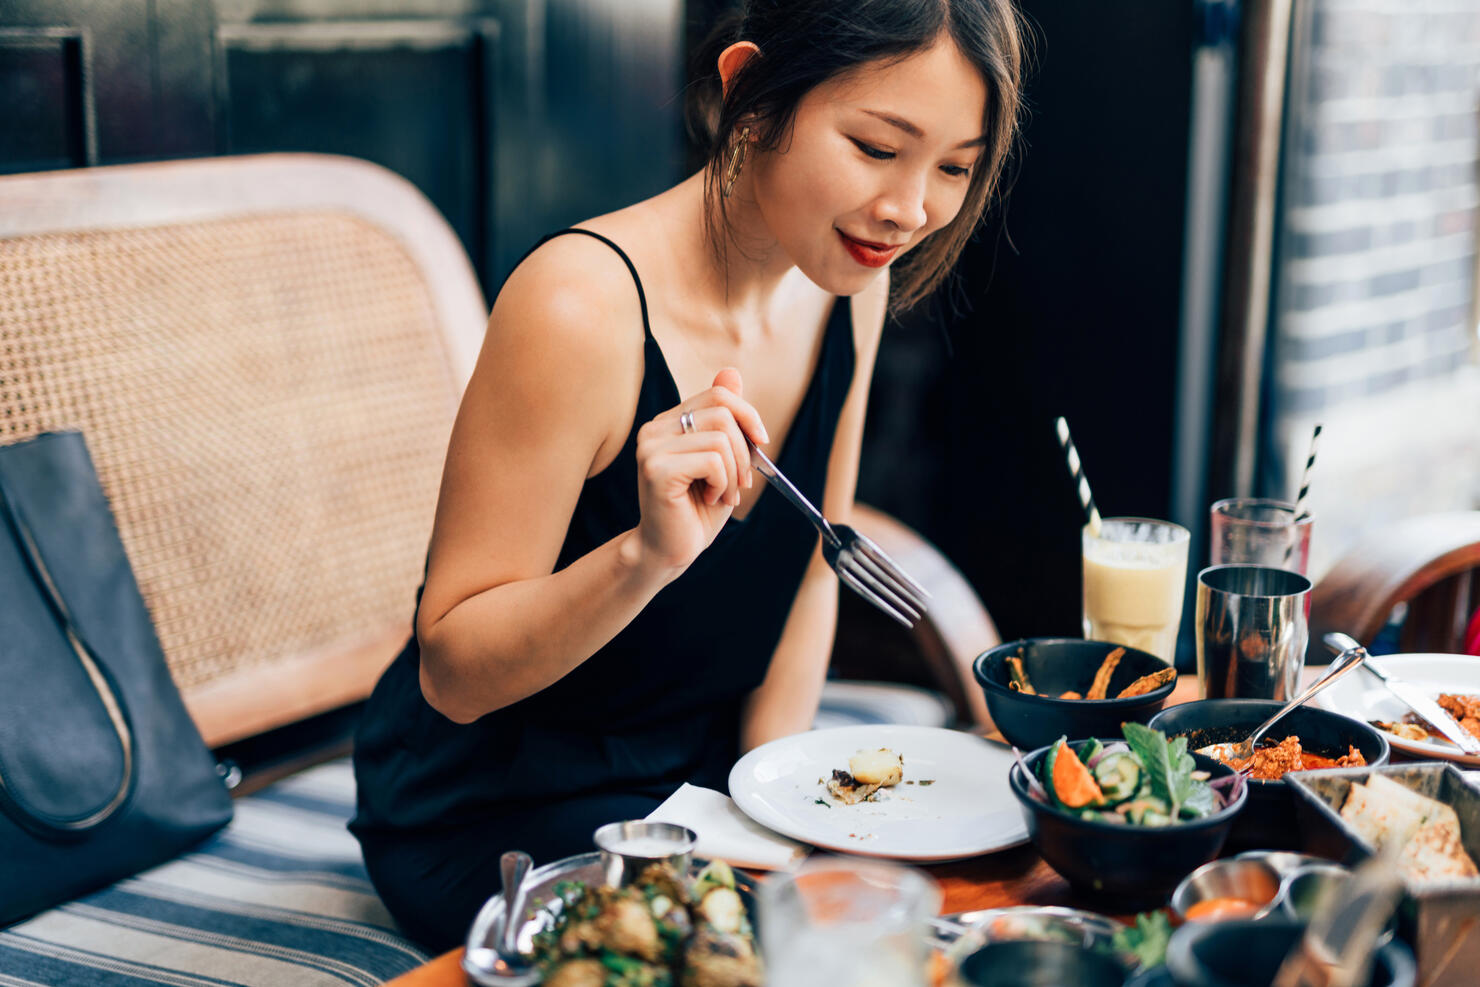 Young Woman Eating Food At The Restaurant